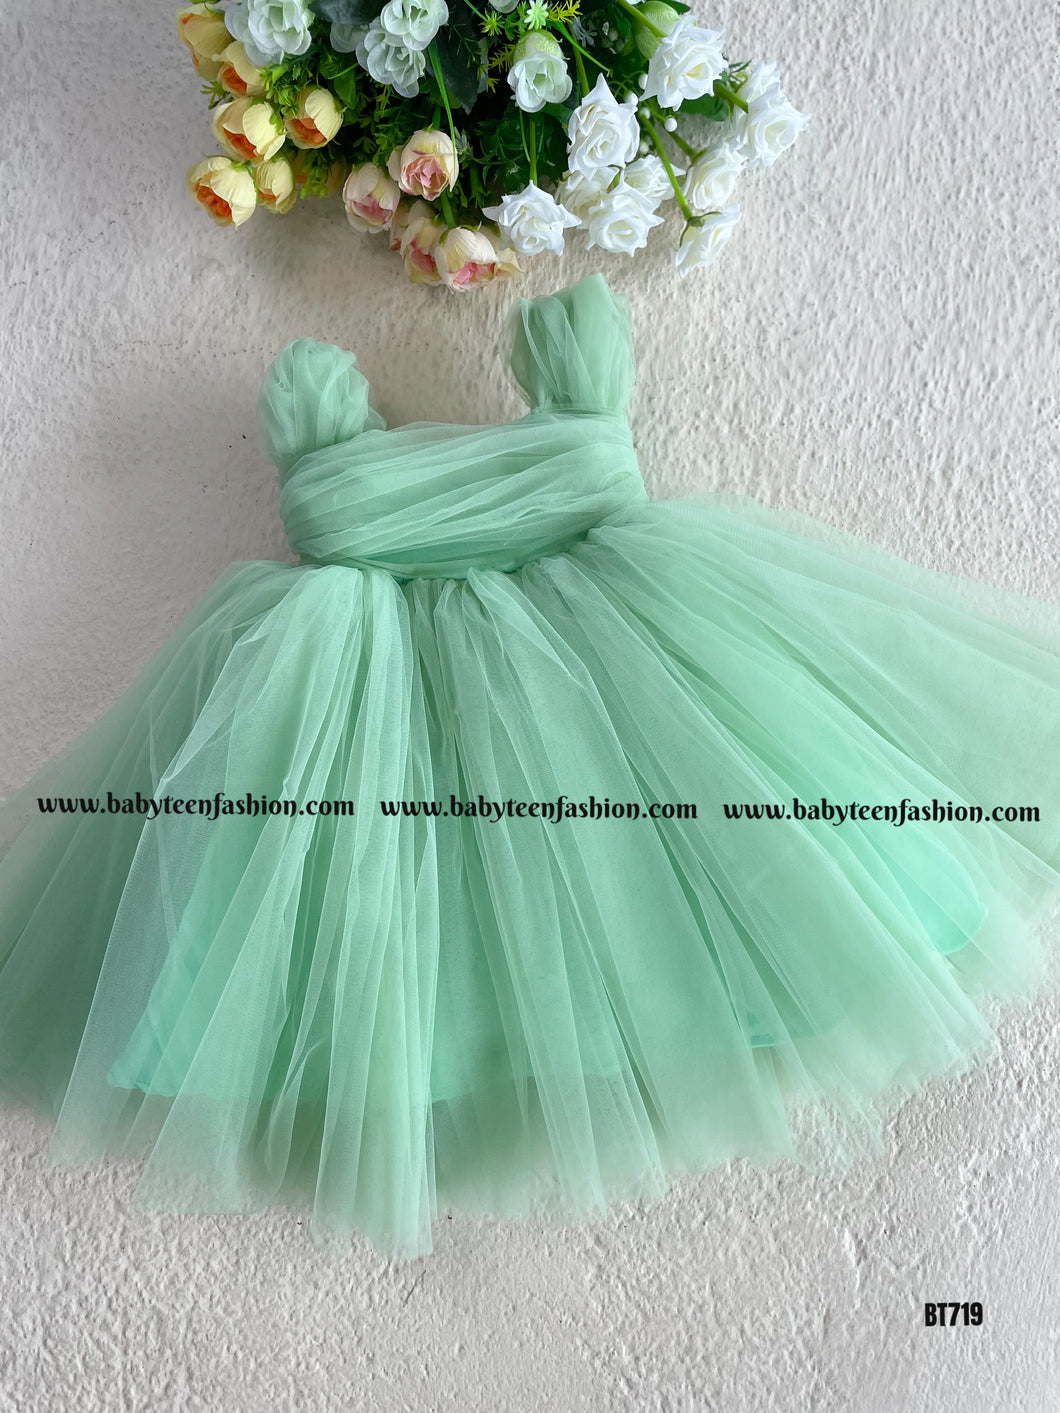 BT719 Mint Grace Gown - Whispers of Elegance for Your Little Darling!